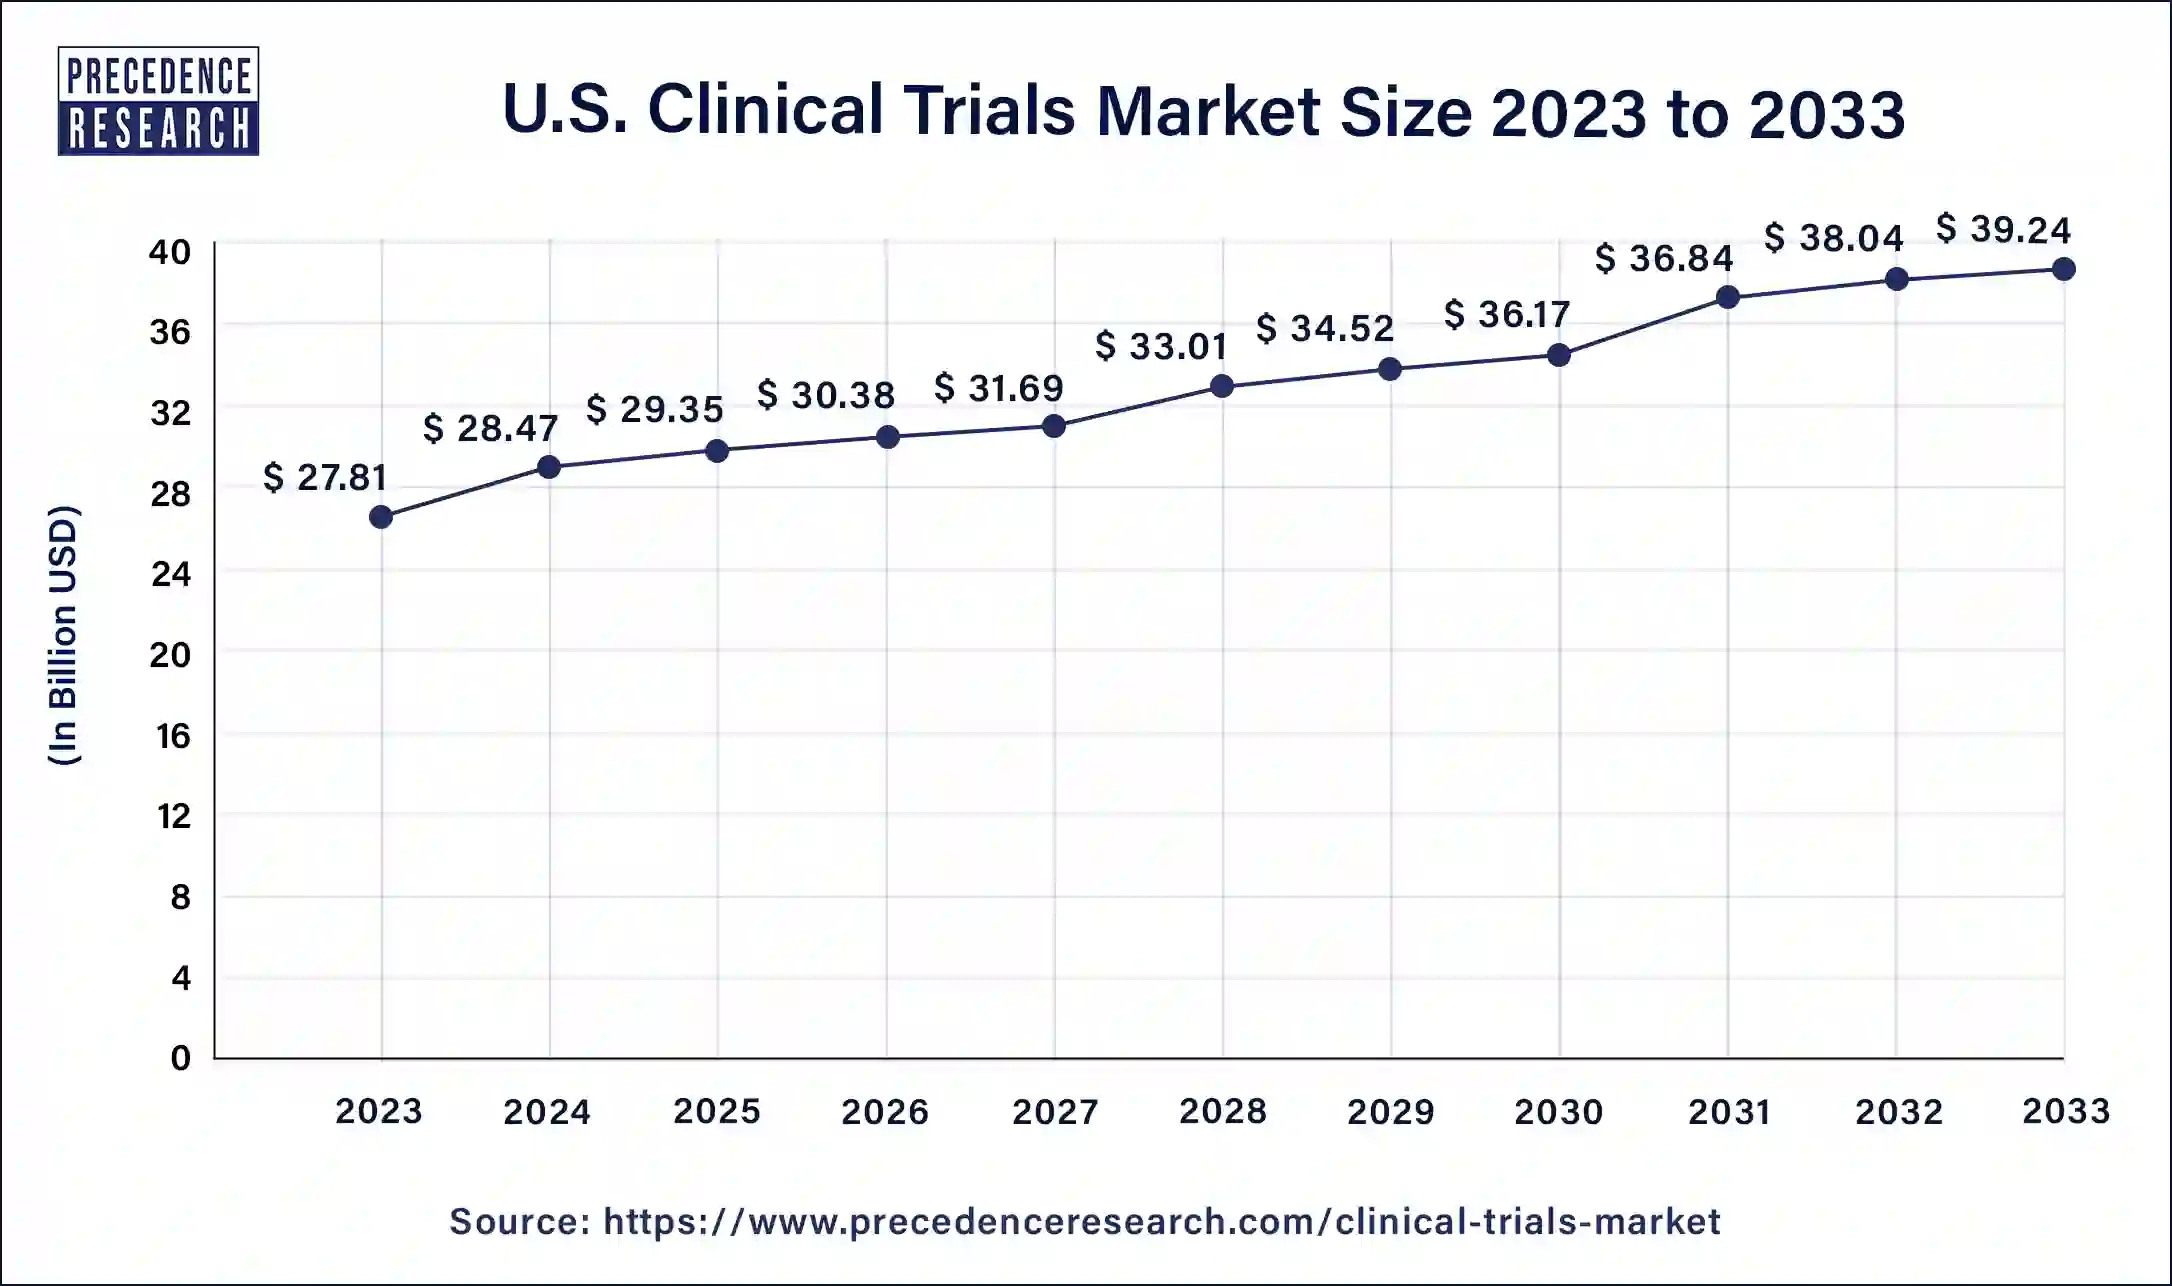 Clinical Trials Market Size in U.S. 2024 to 2033